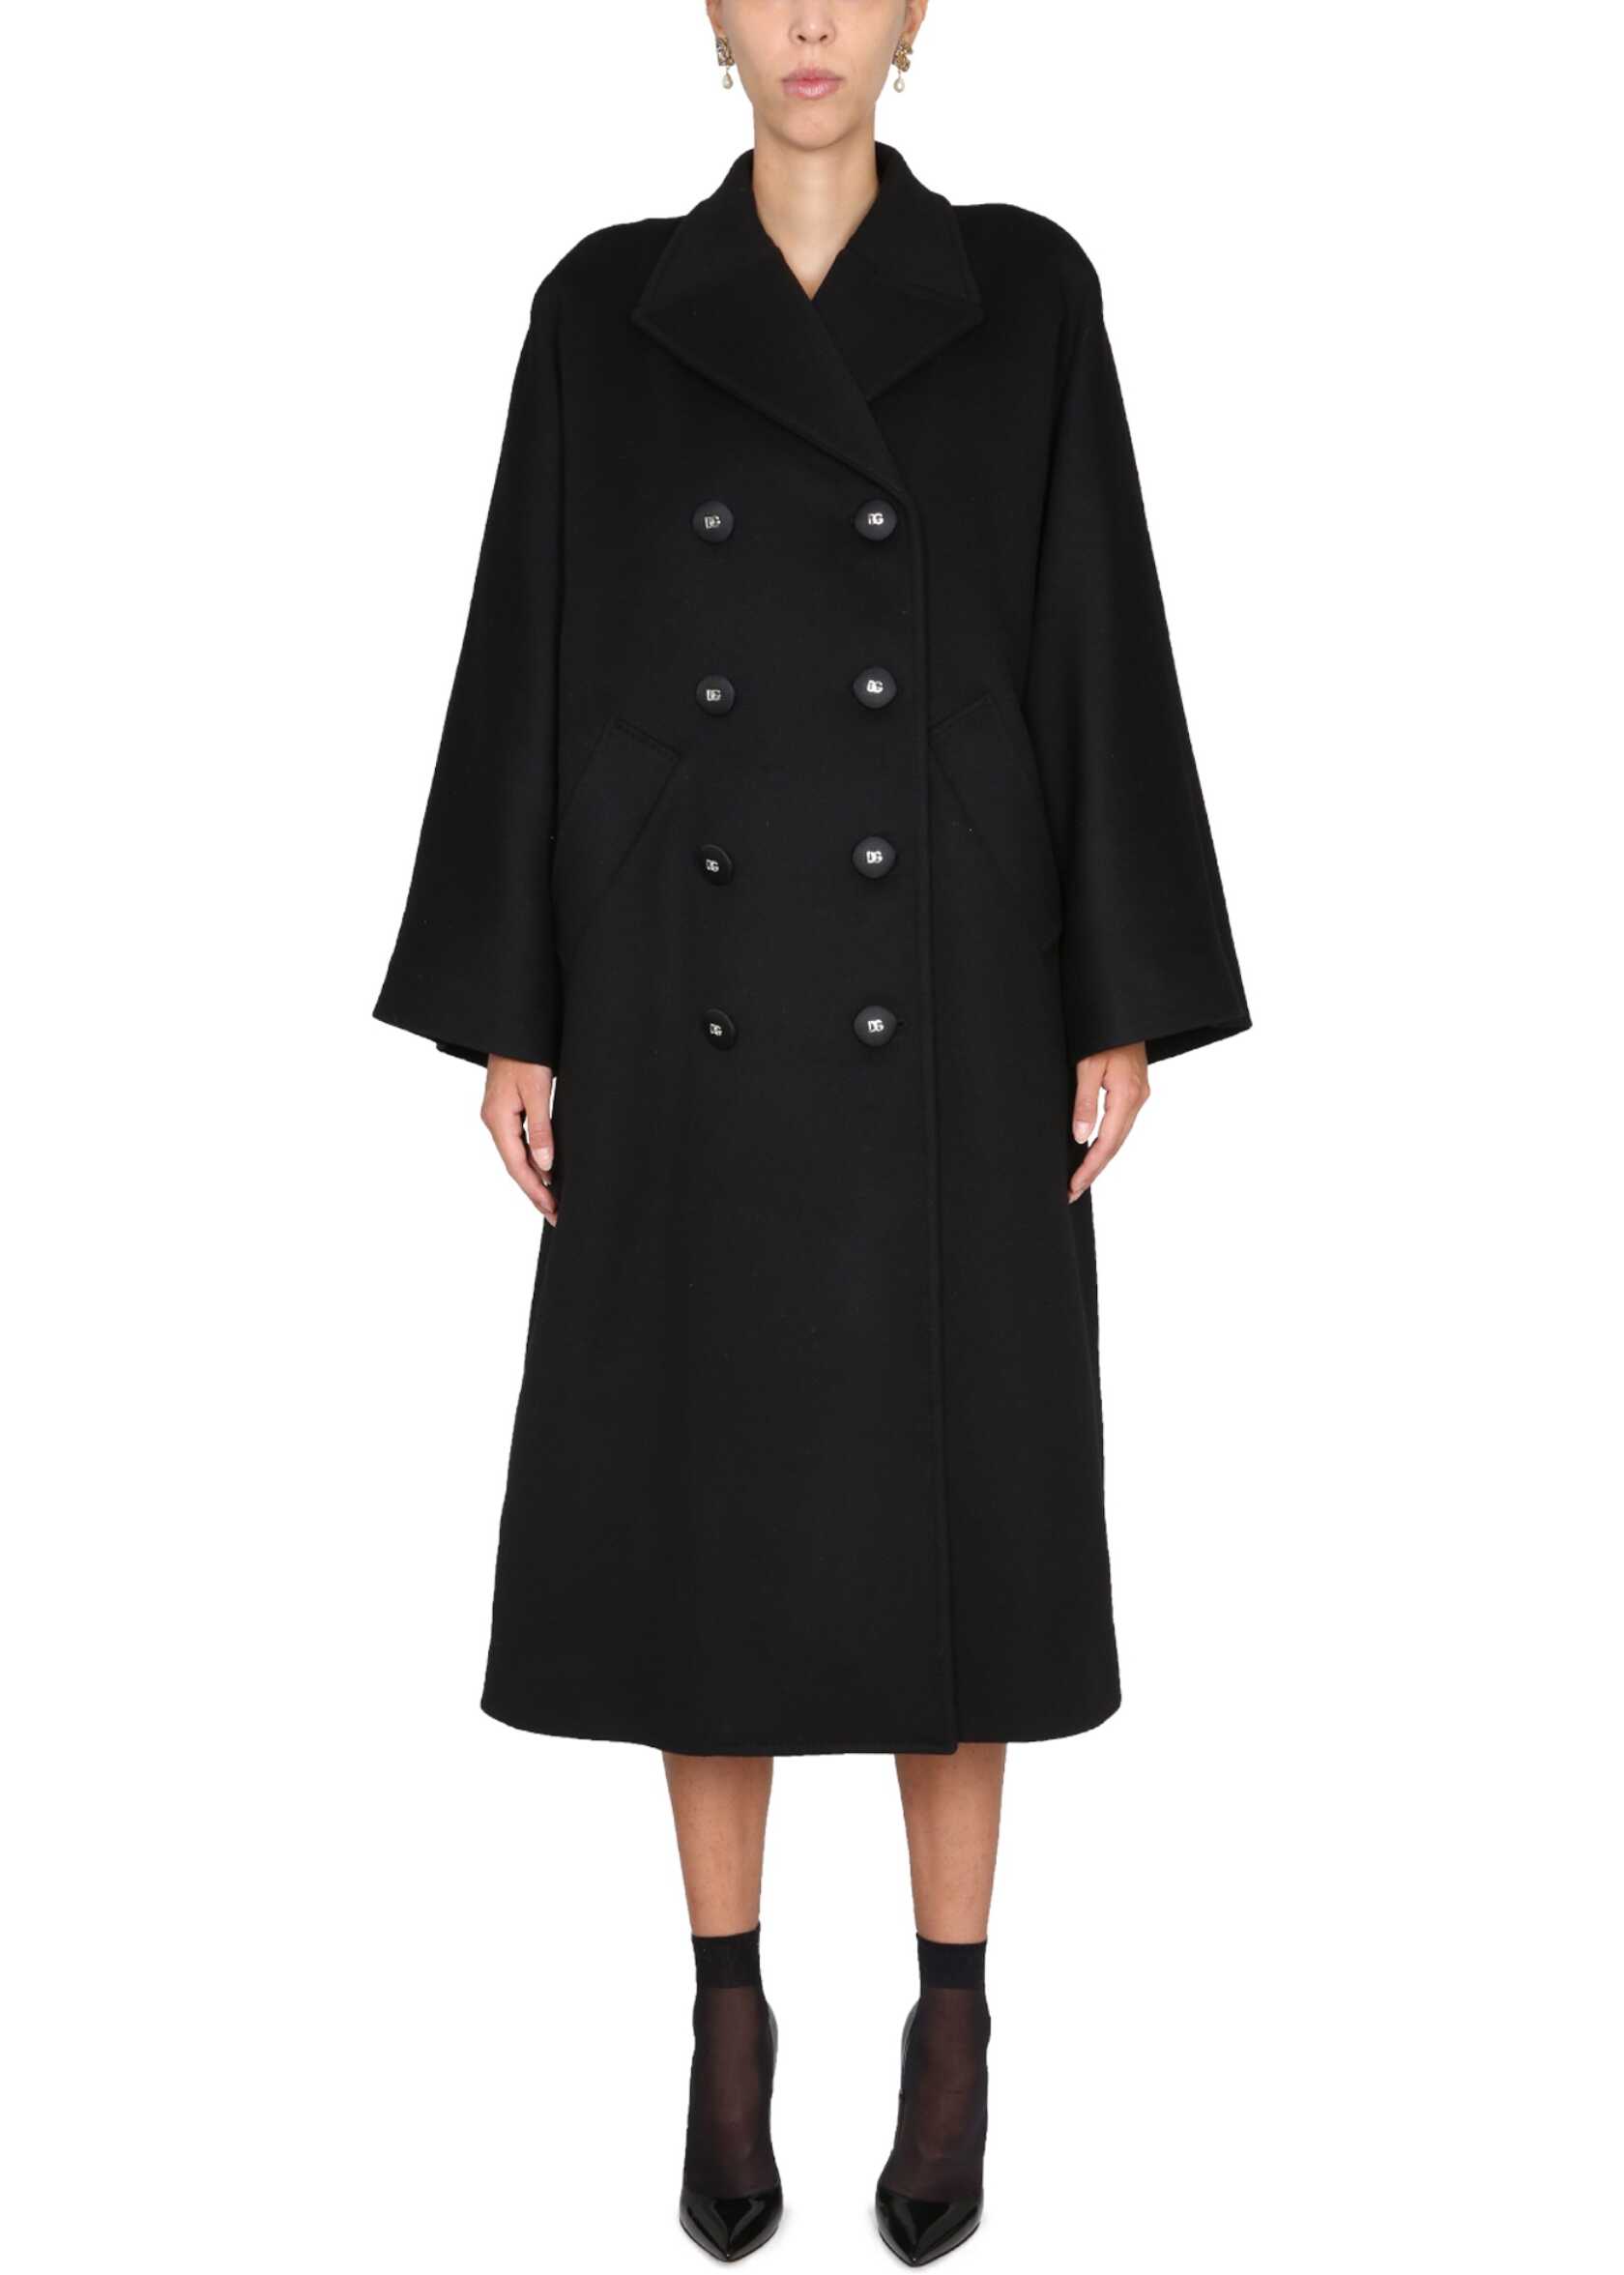 Dolce & Gabbana Double-Breasted Coat BLACK